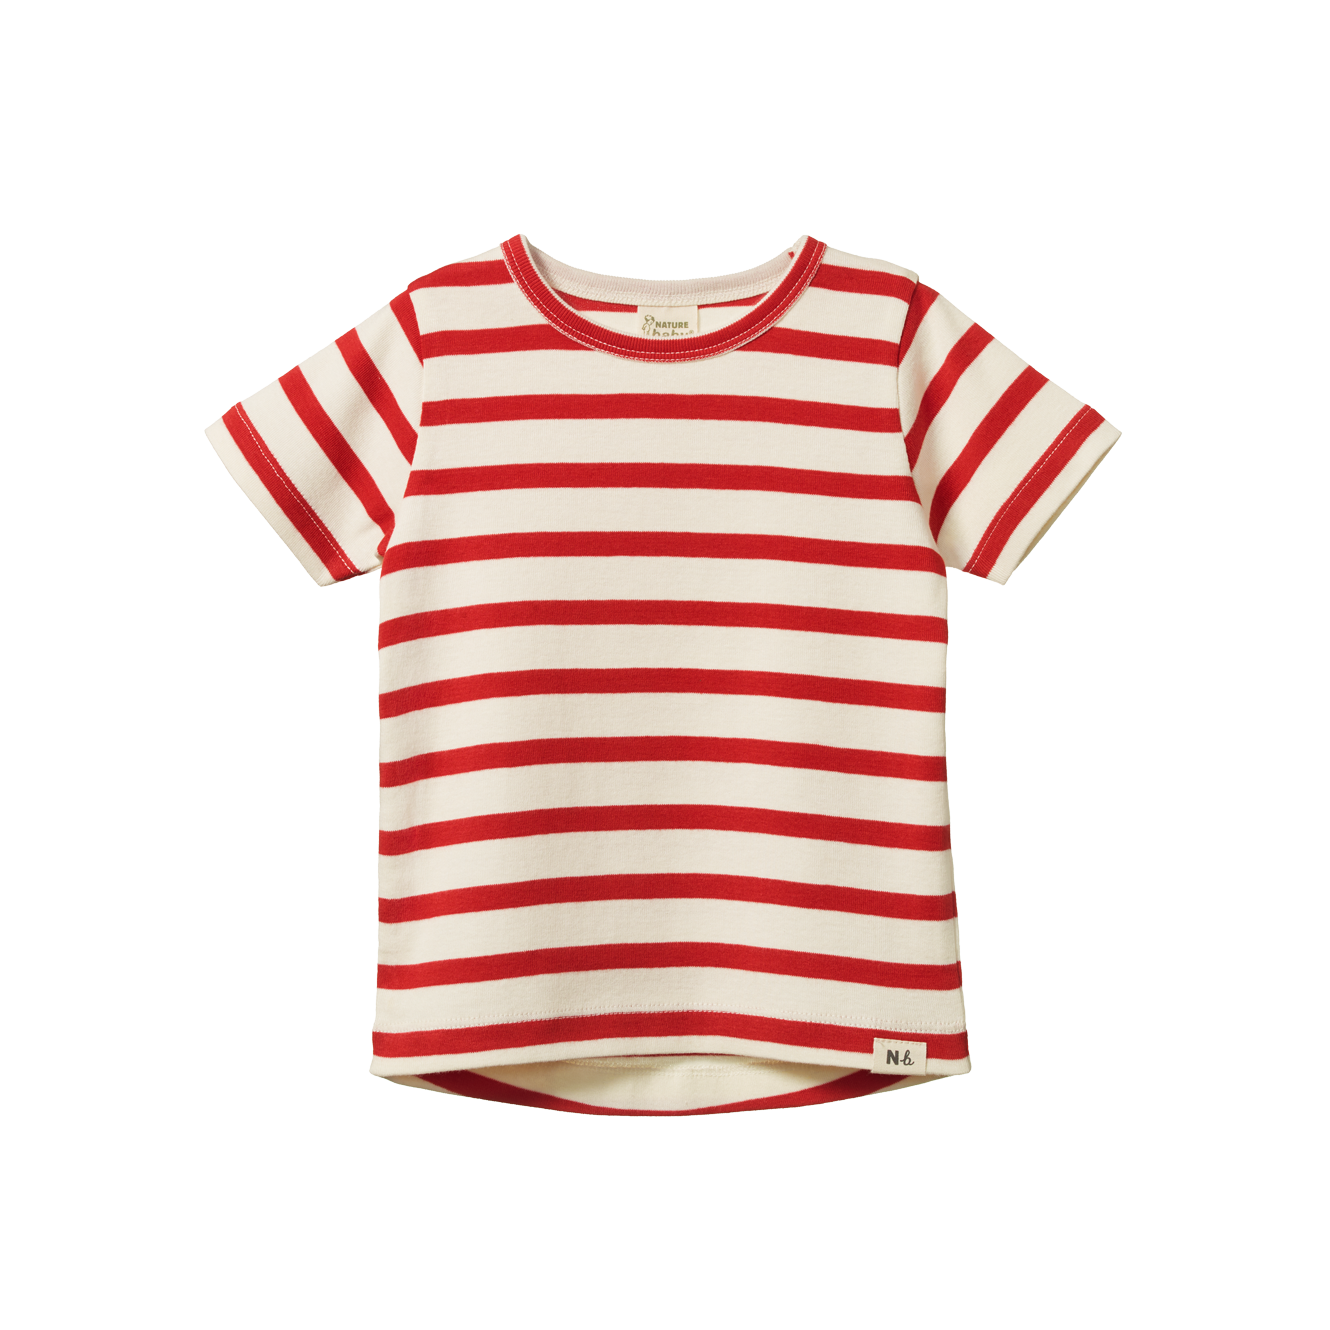 Nature Baby - River Tee - Red Sailor Stripe